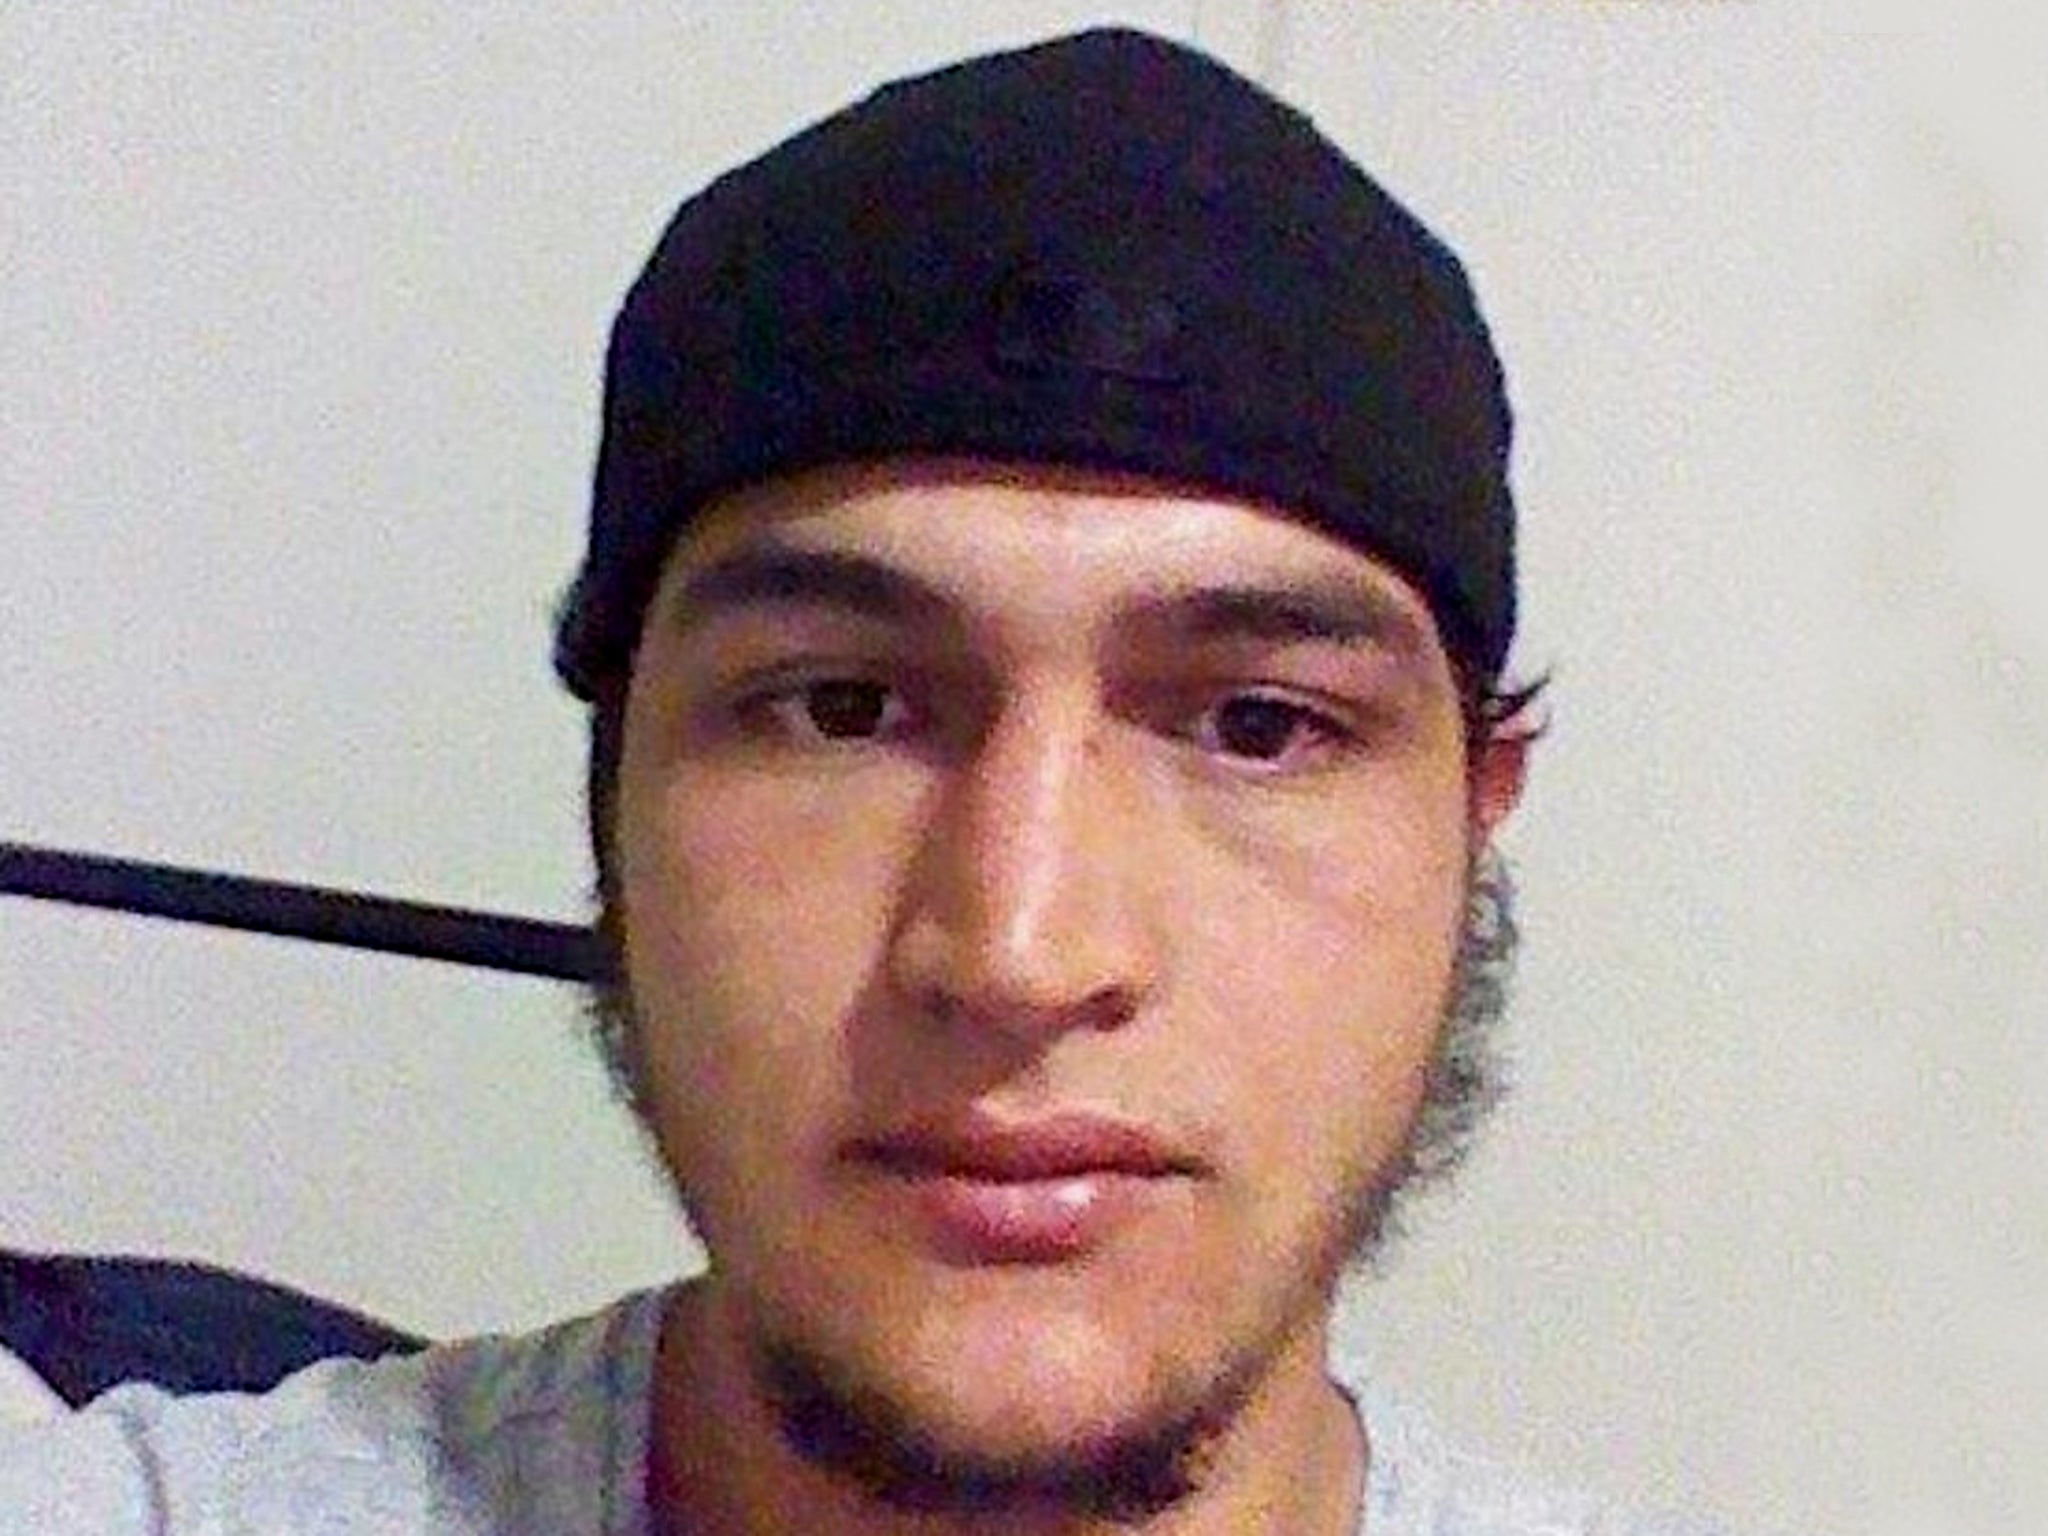 The 40-year-old Tunisian's number was allegedly saved in the mobile phone of chief truck attack suspect Anis Amri